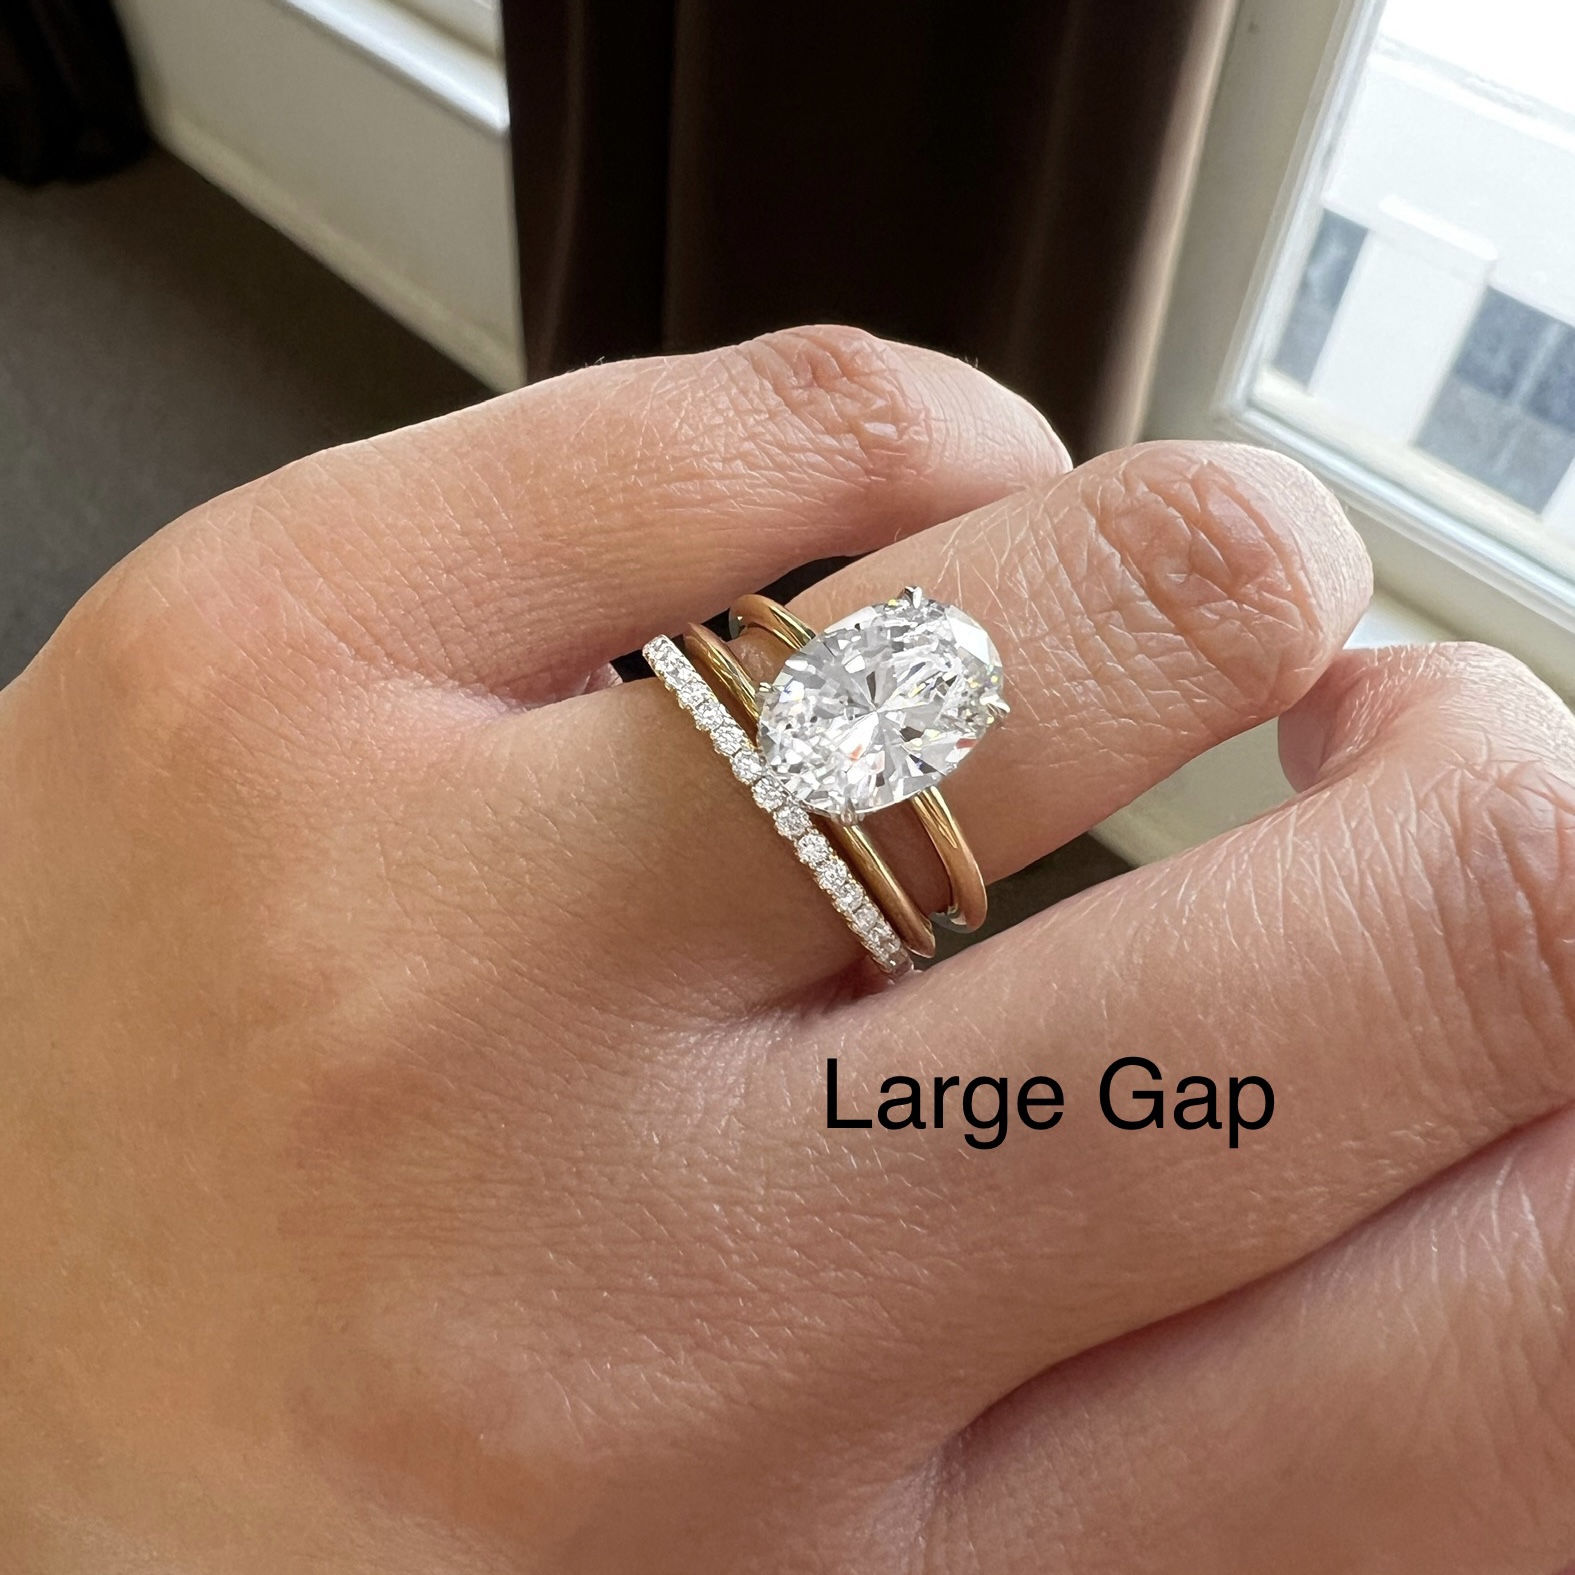 Best Engagement Rings  Top 20 Most Popular Engagement Rings